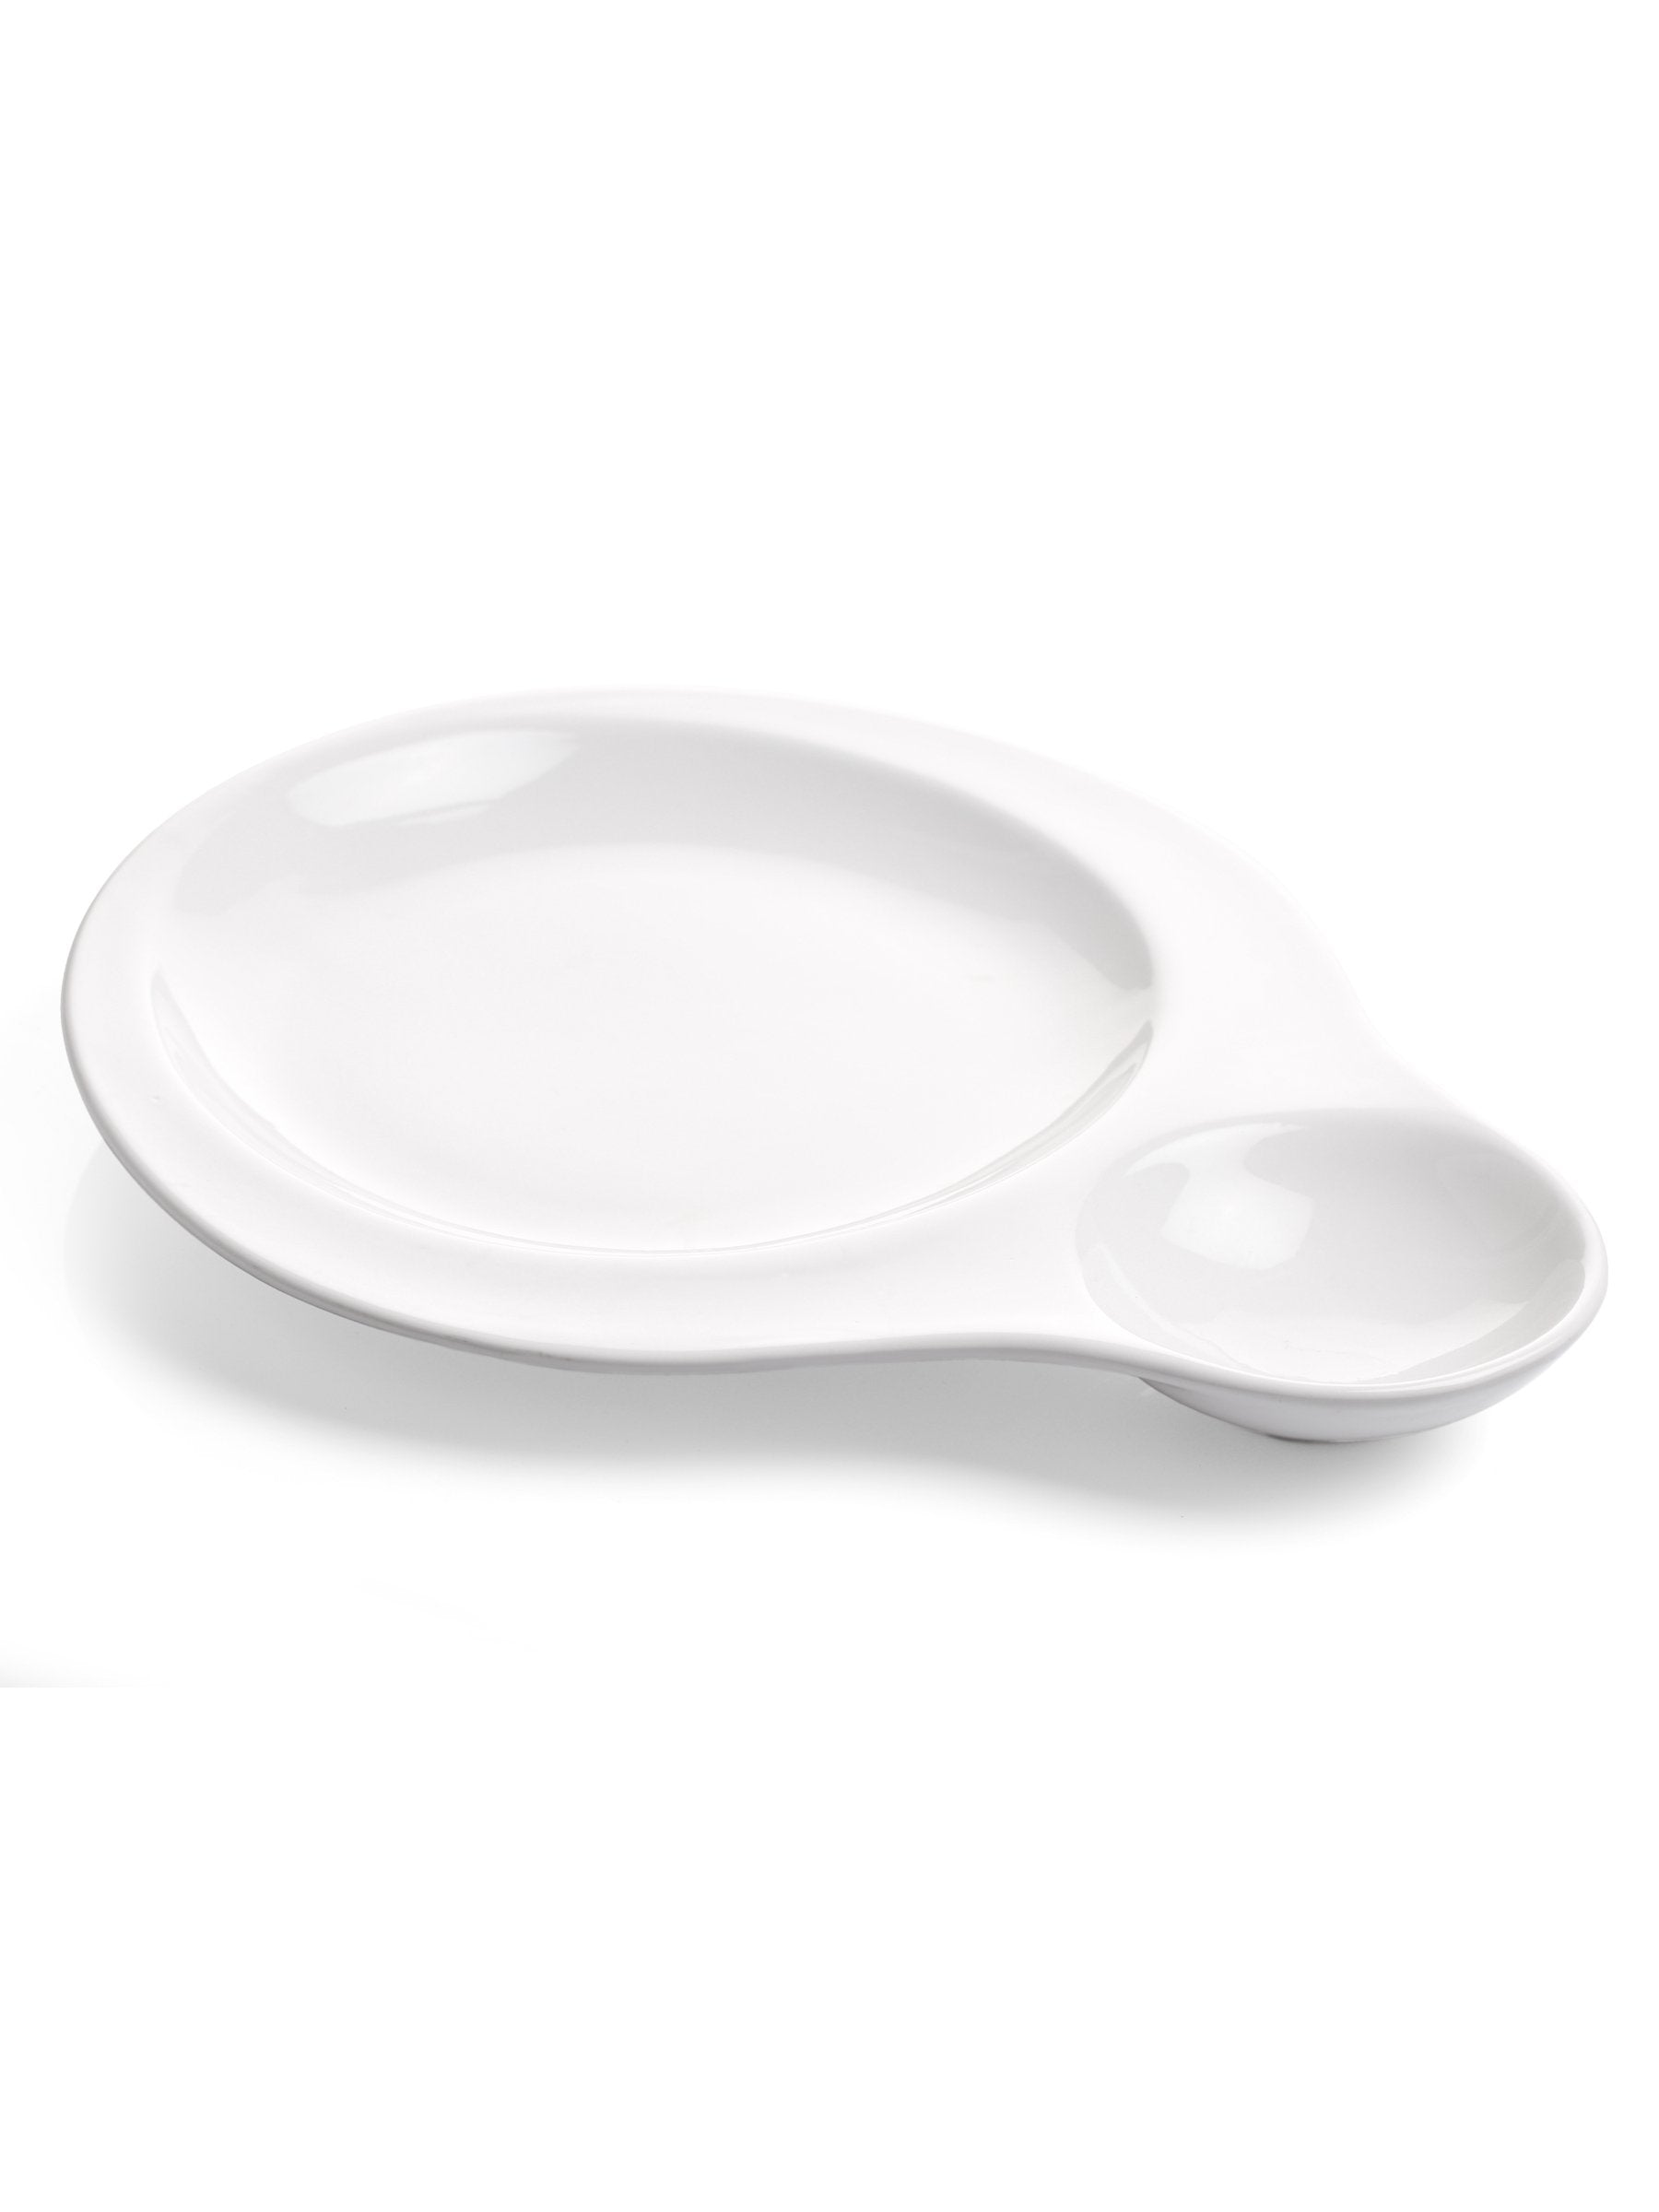 Clay Craft Basic Platter Chip & Dip Belly 1 Piece Plain White - Clay Craft India